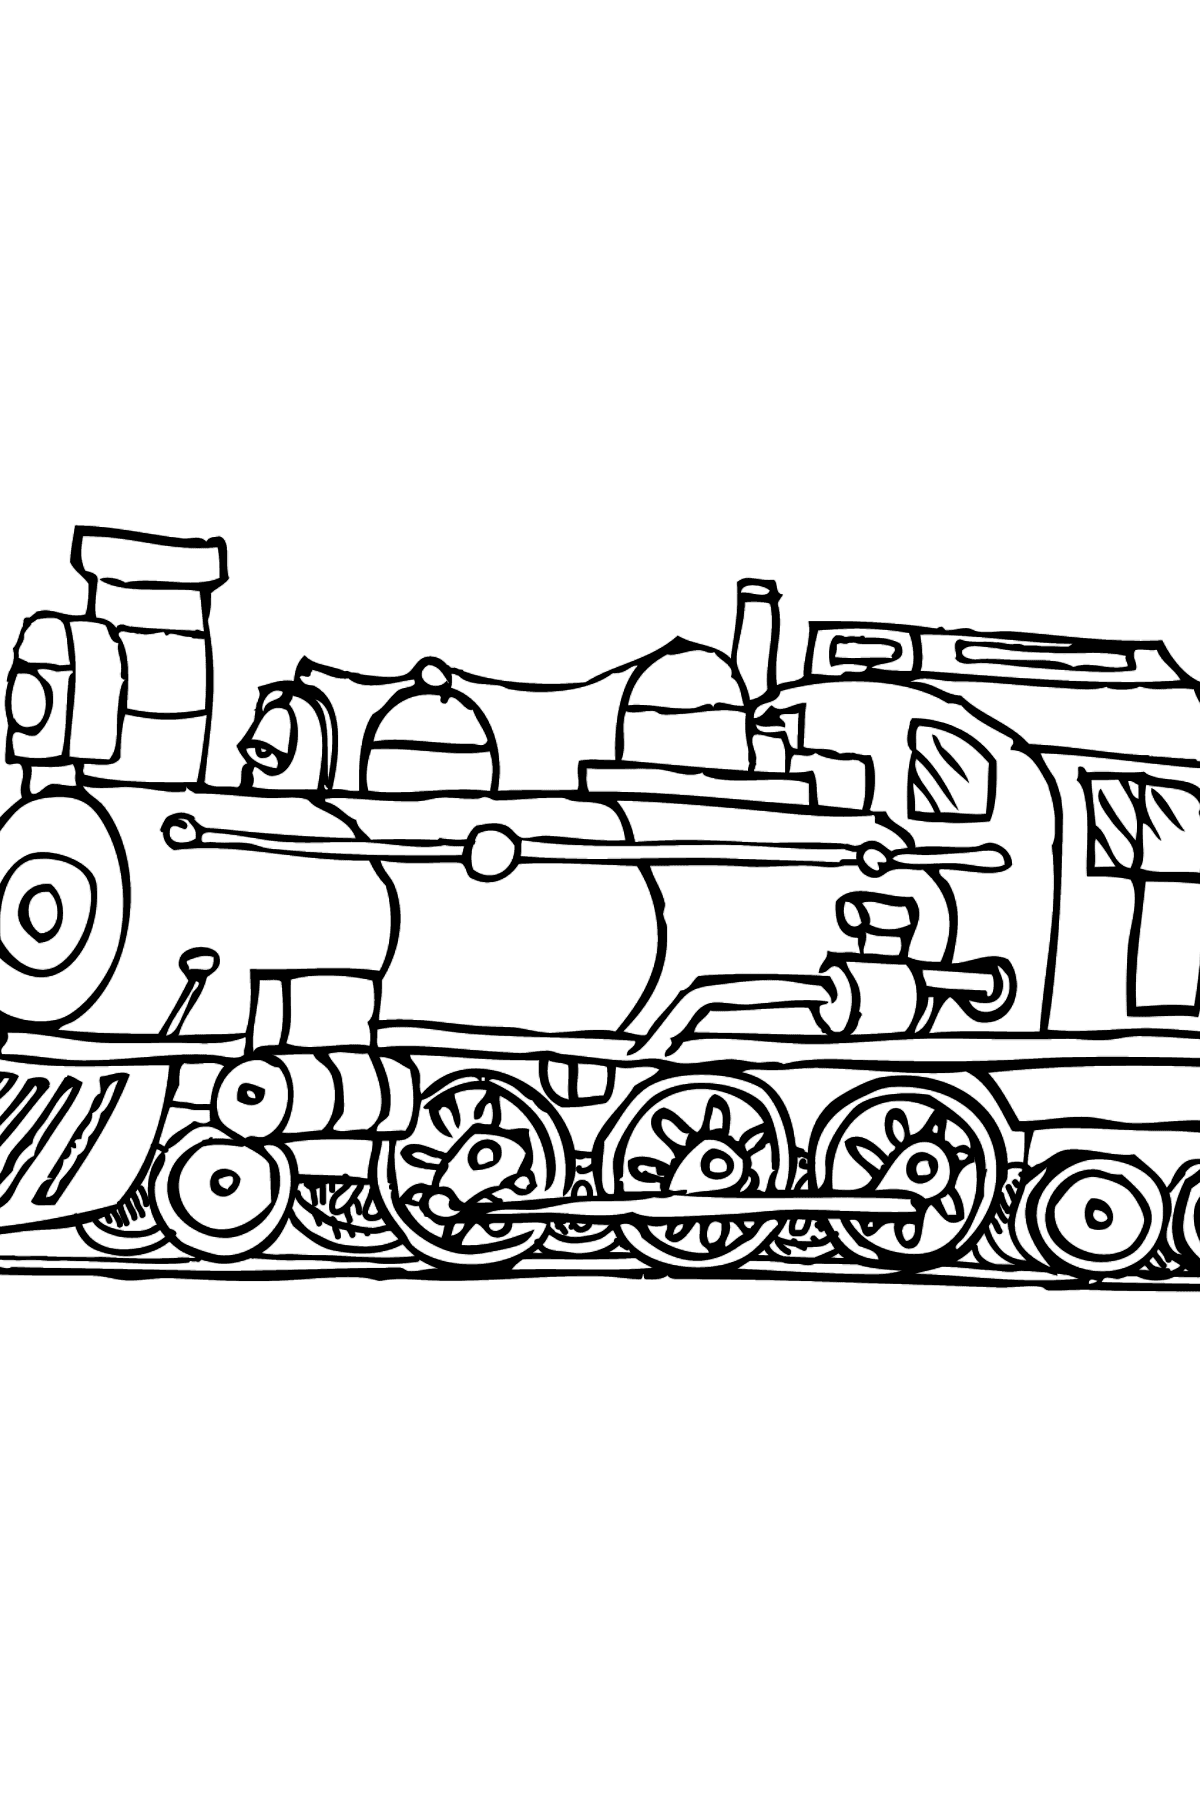 Coloring Page - A Locomotive - Coloring Pages for Kids